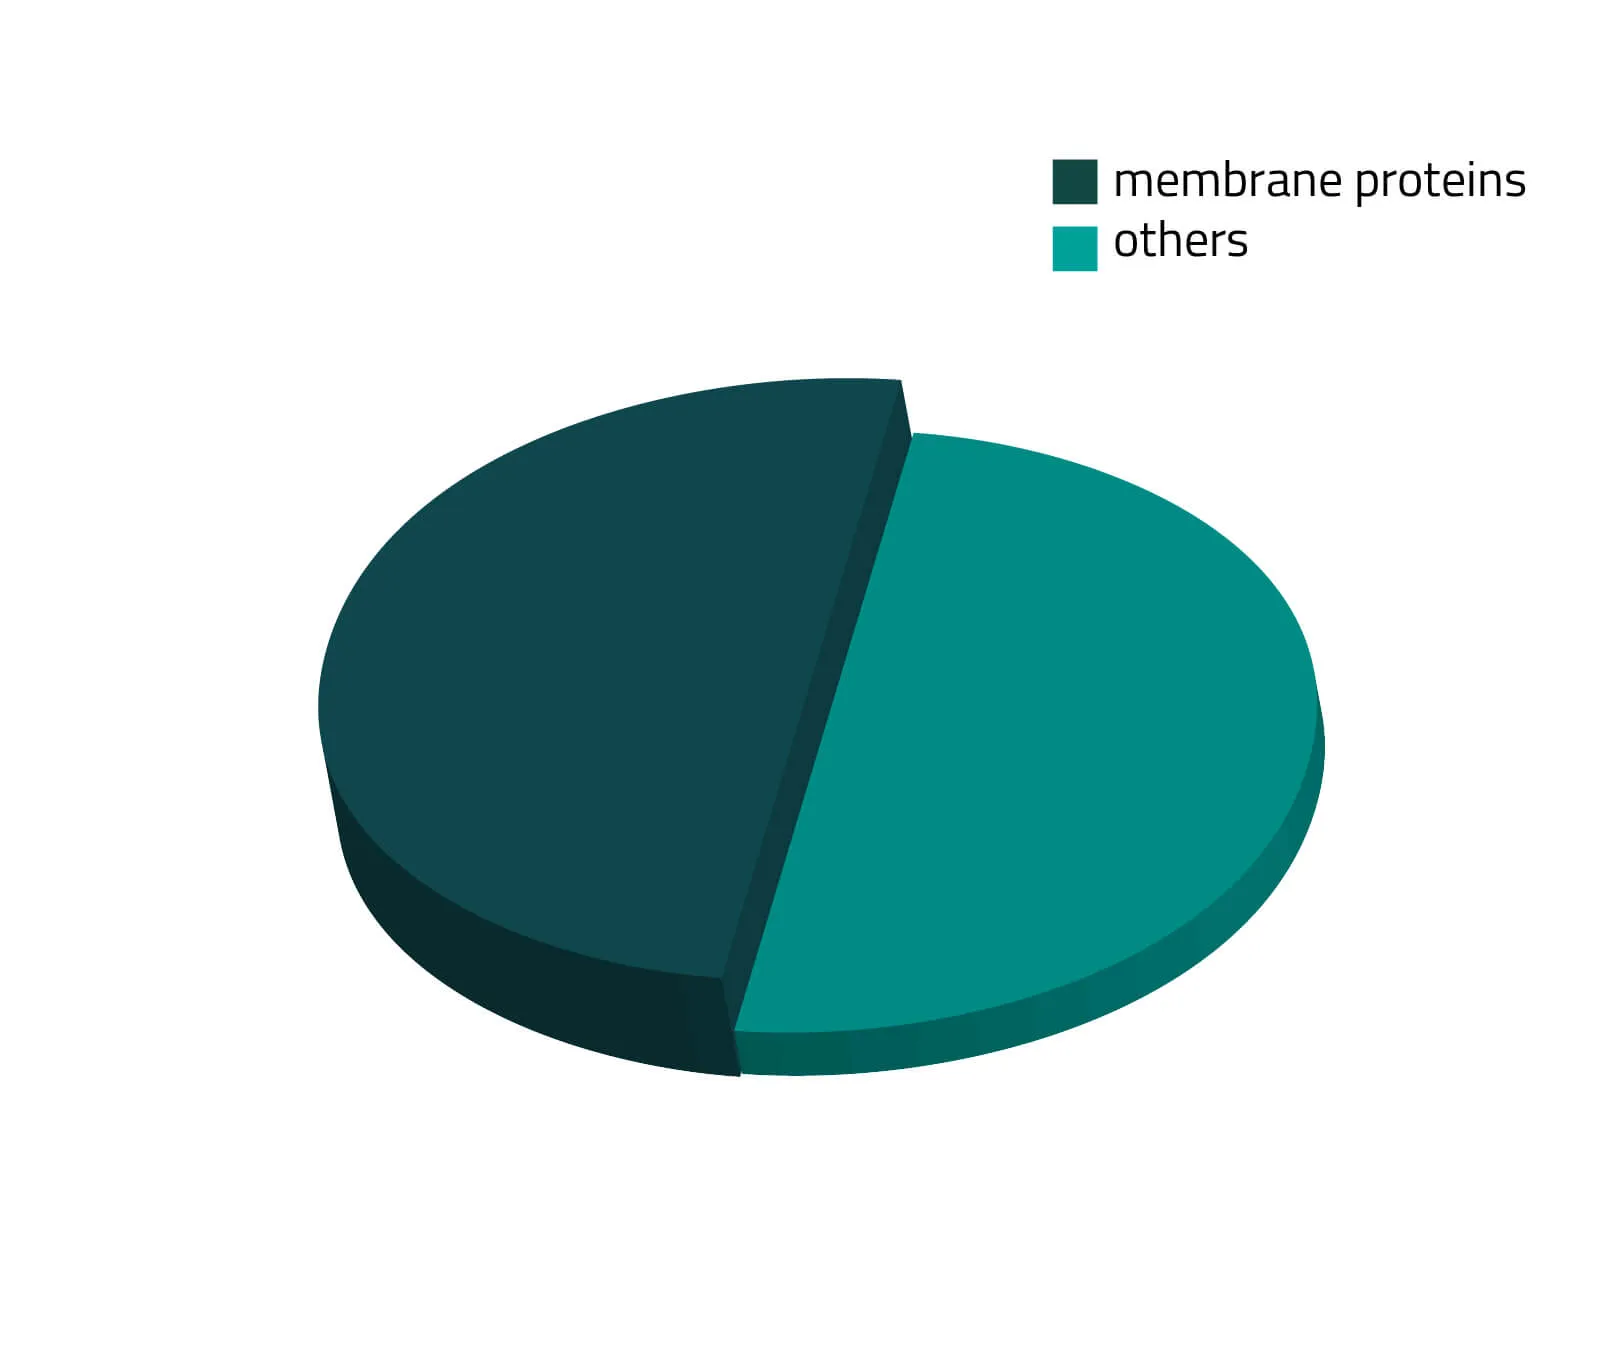 Pie chart indicating that half of all approved therapeutics target membrane proteins